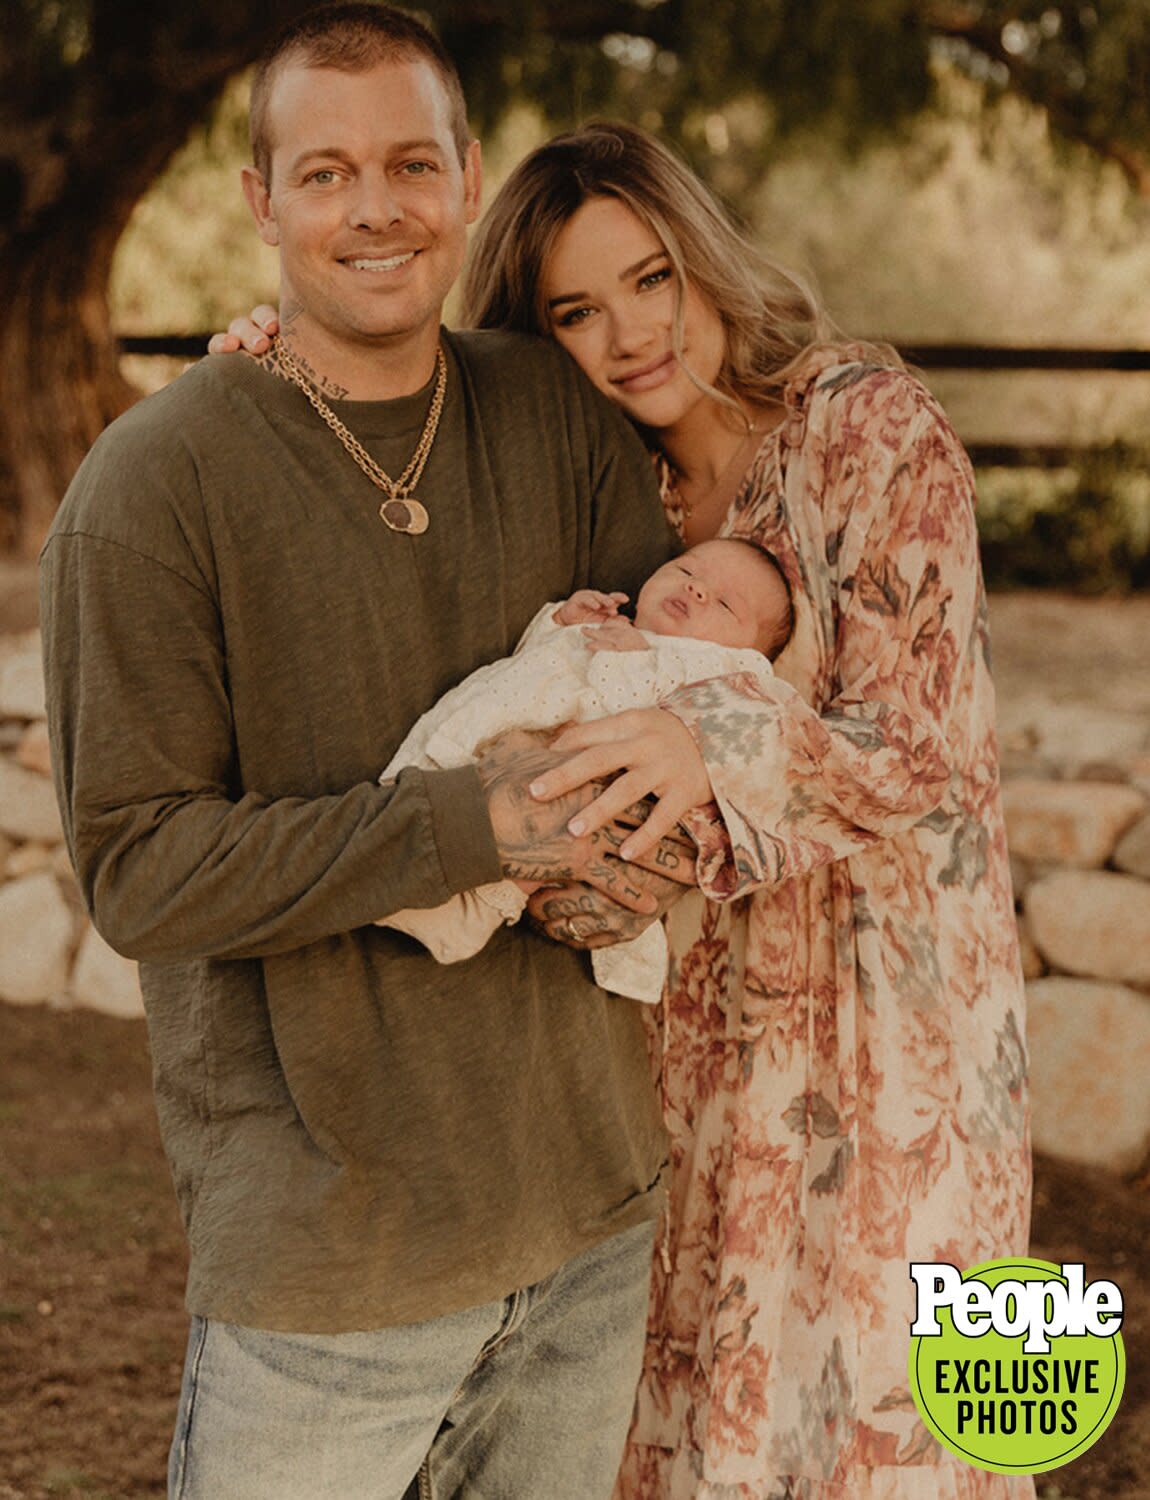 Ryan Sheckler and Wife Abigail Welcome a Baby Girl on Their First Wedding Anniversary